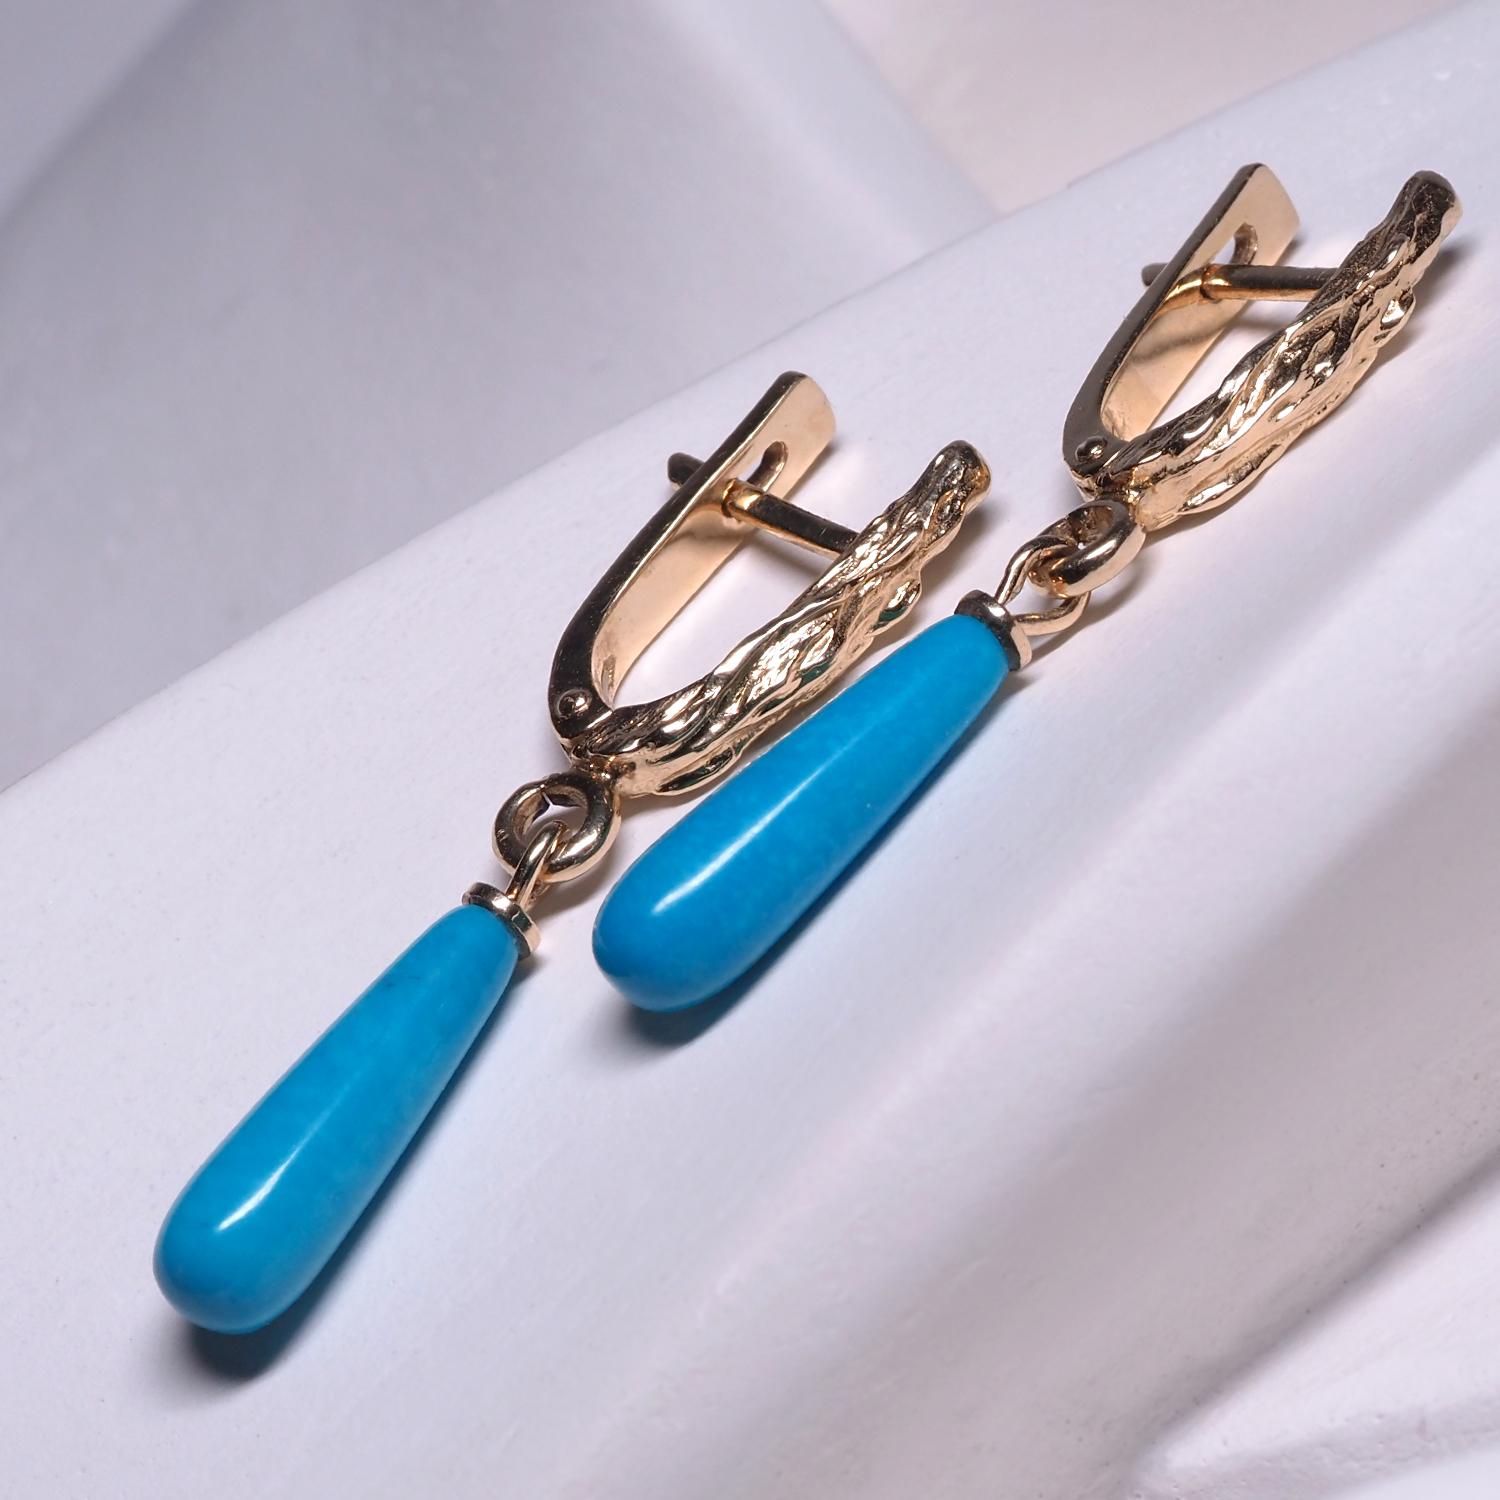 14K yellow gold earrings with natural pear shaped Sleeping beauty Turquoise
turquoise origin - Arizona, United States
gem size is 0.2 х 0.47 in / 5 х 12 mm
earrings weight - 5.19 grams
earrings height - 1.61 in / 41 mm


We ship our jewelry